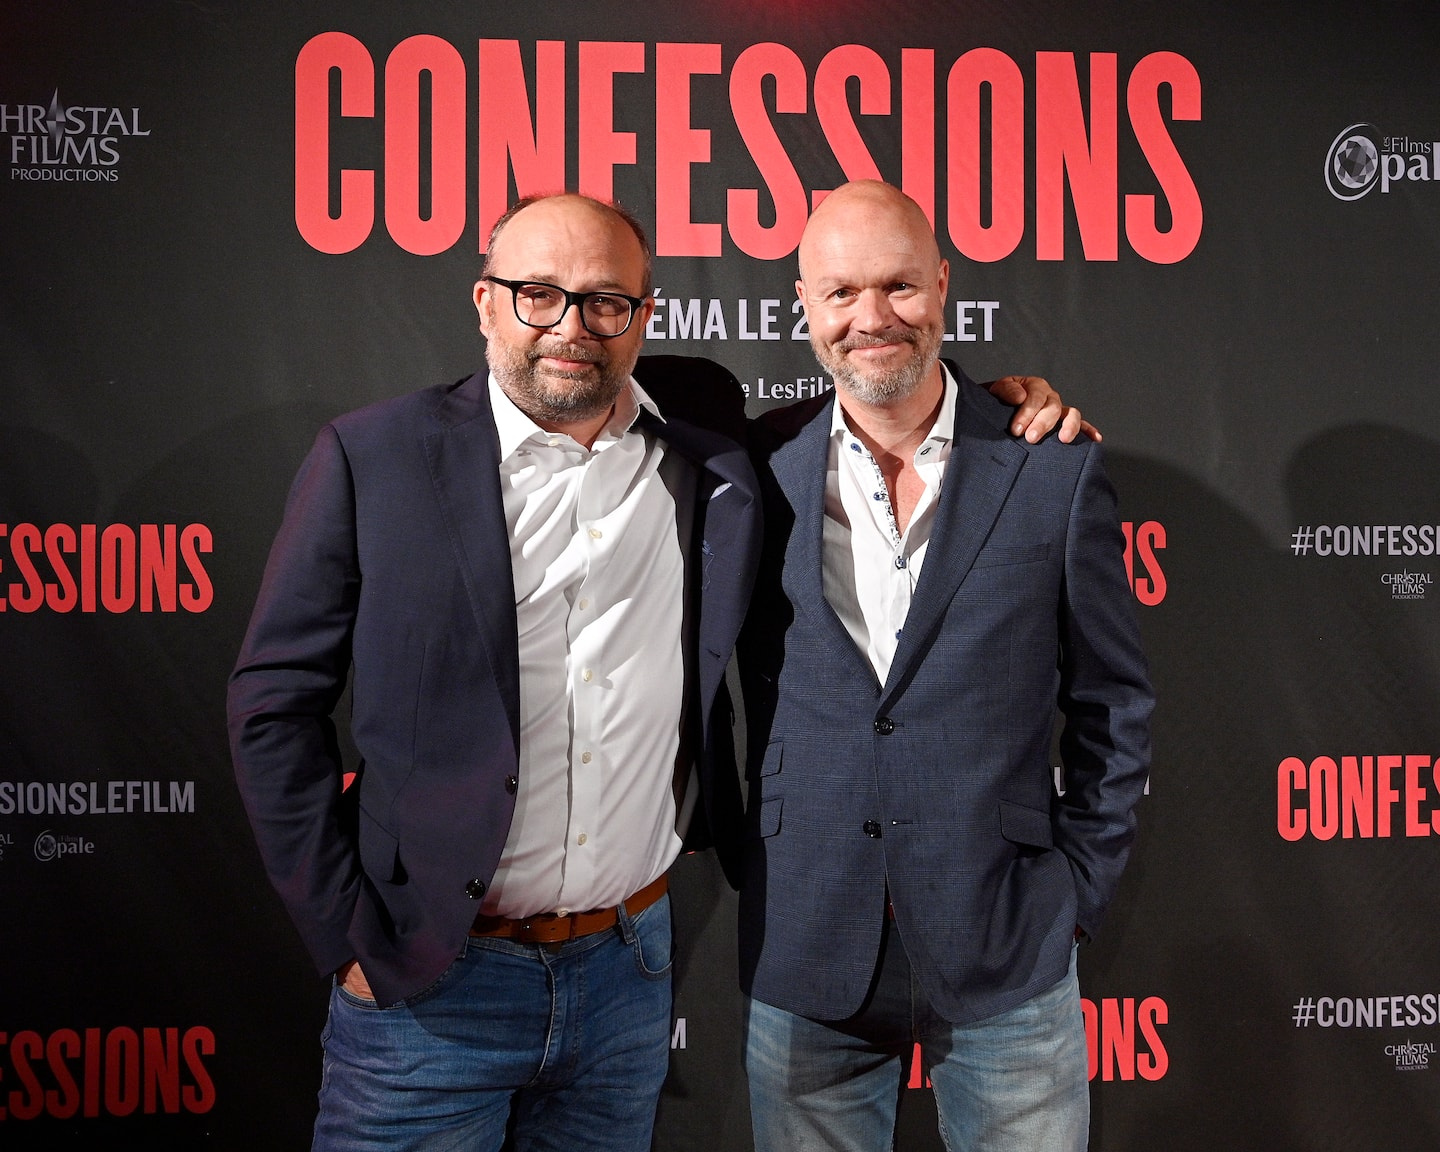 Confessions: From Book to Film